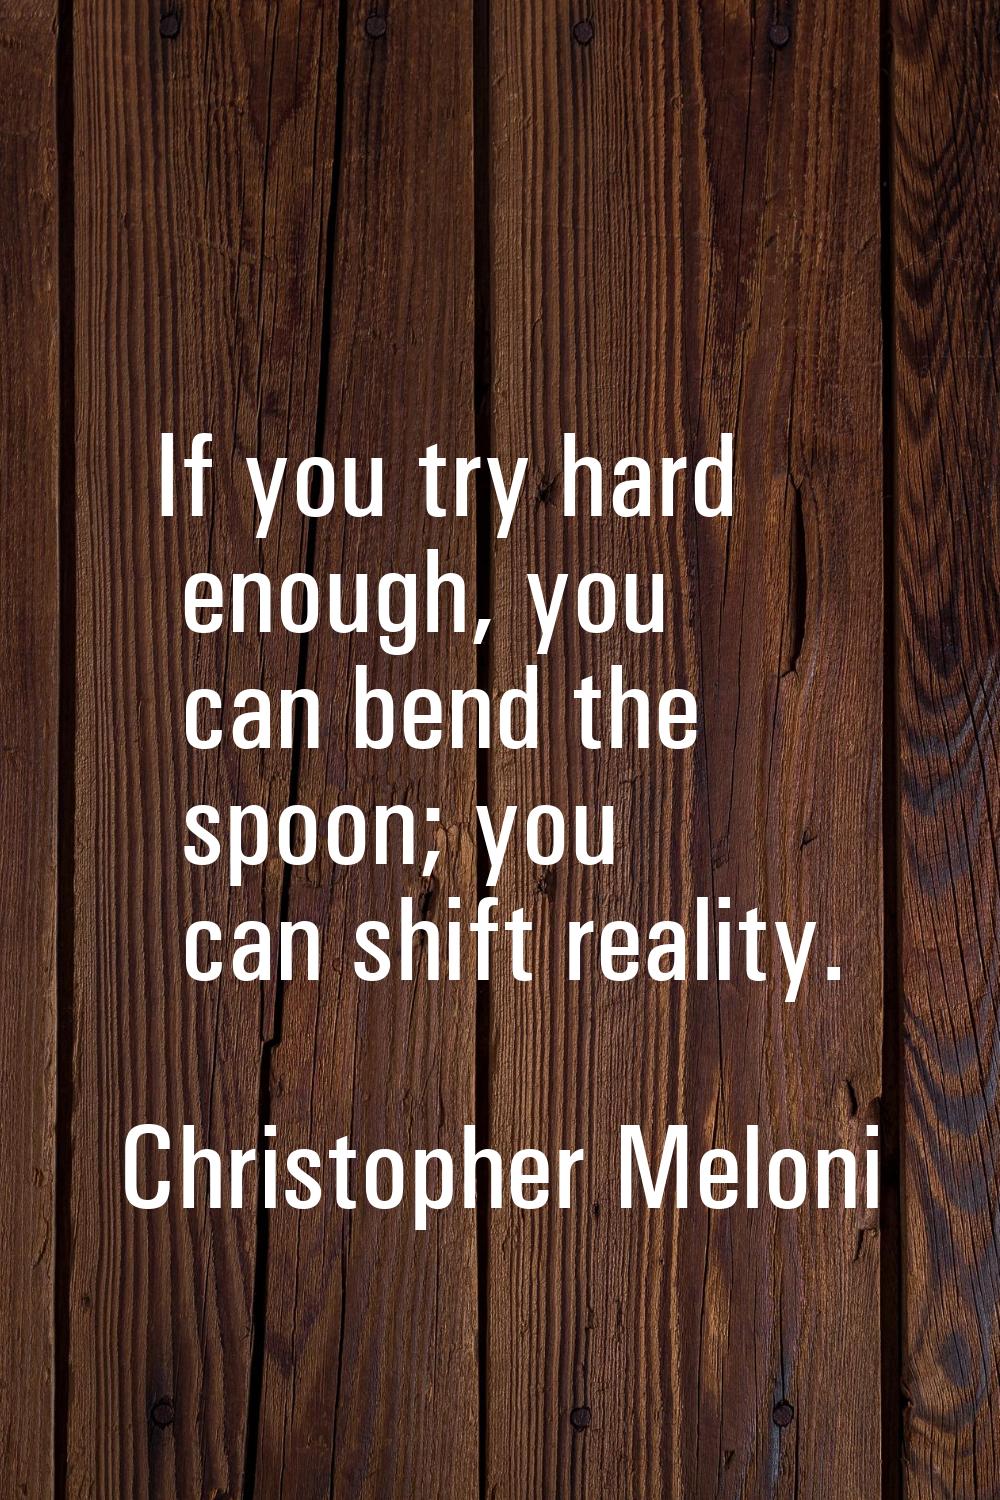 If you try hard enough, you can bend the spoon; you can shift reality.